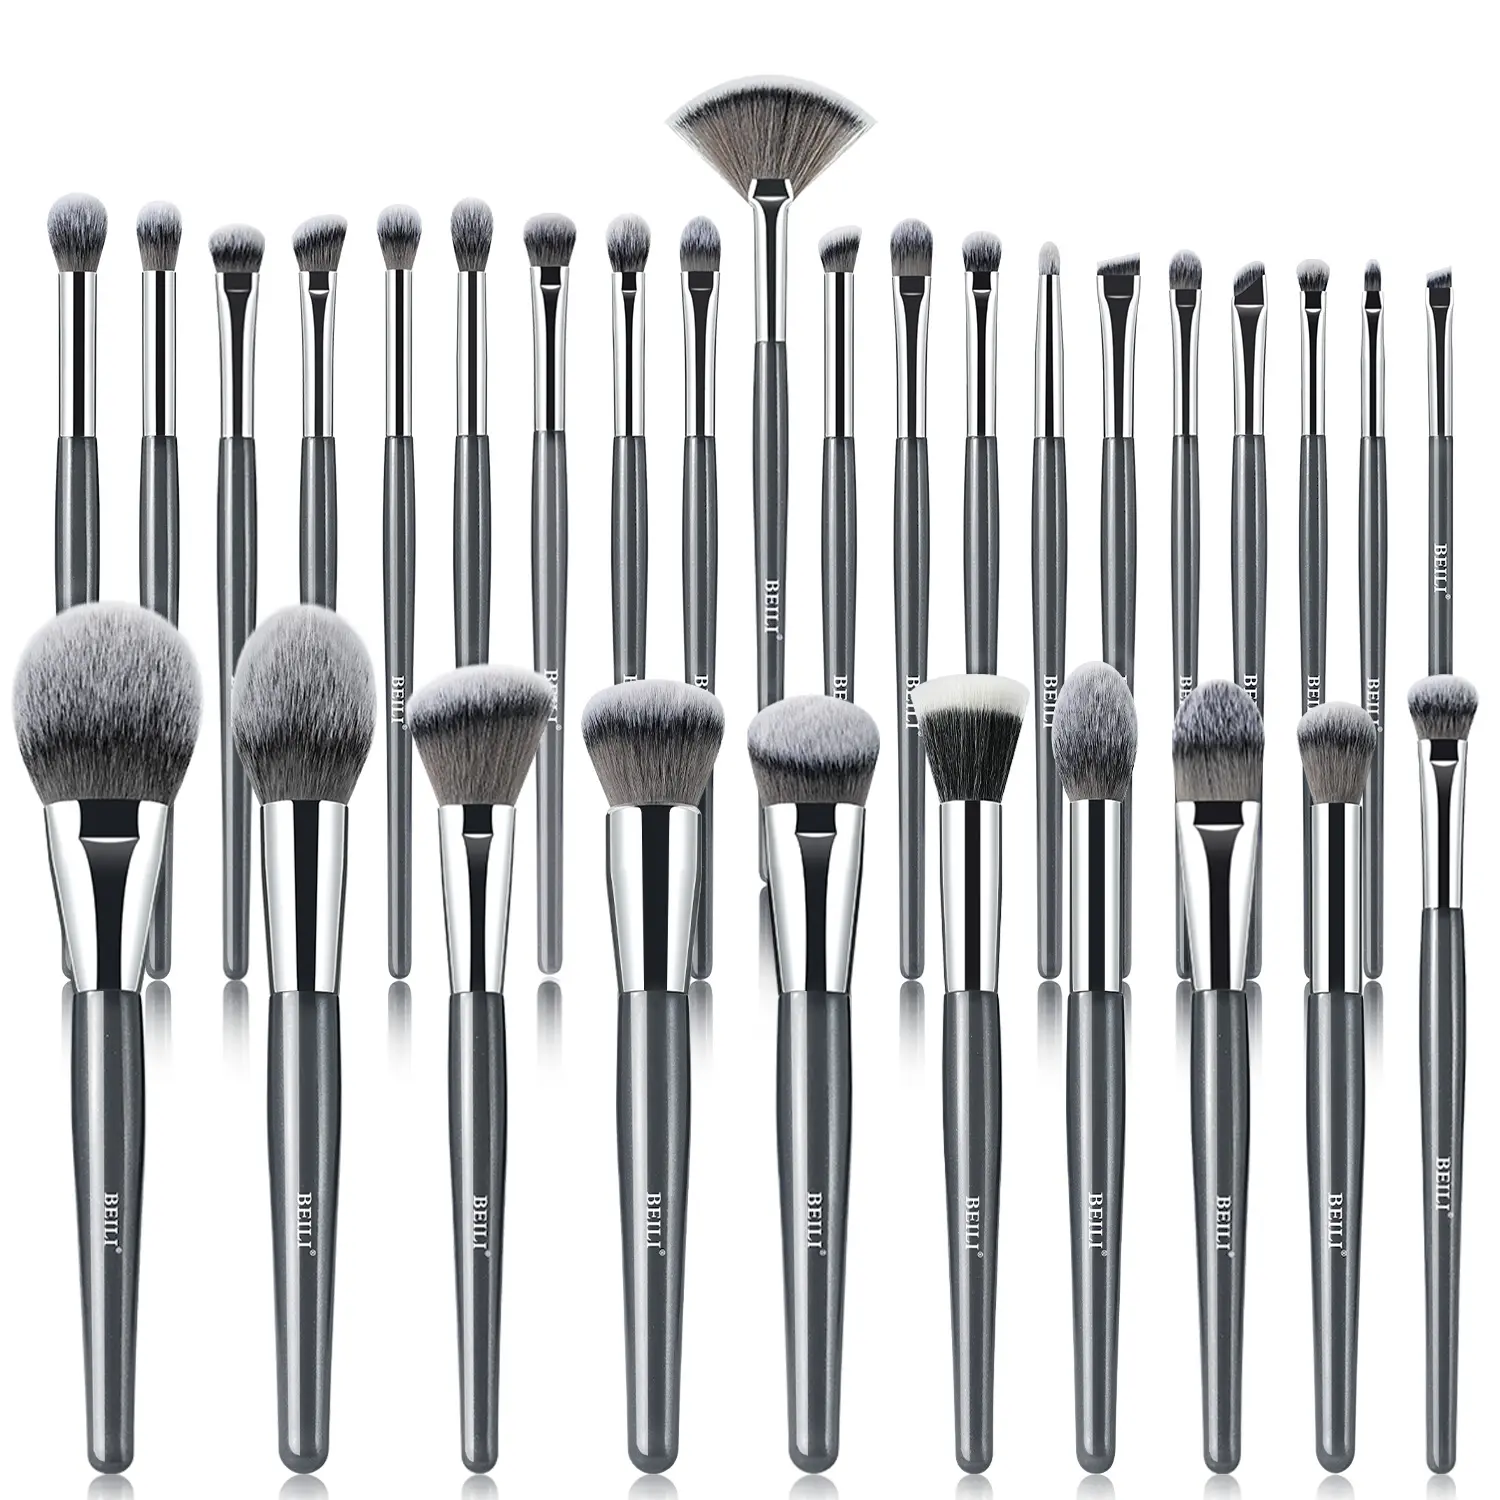 BEILI private label beauty luxury 30pieces grey makeup brush set multifunctional hight quality vegan synthetic makeup brushes